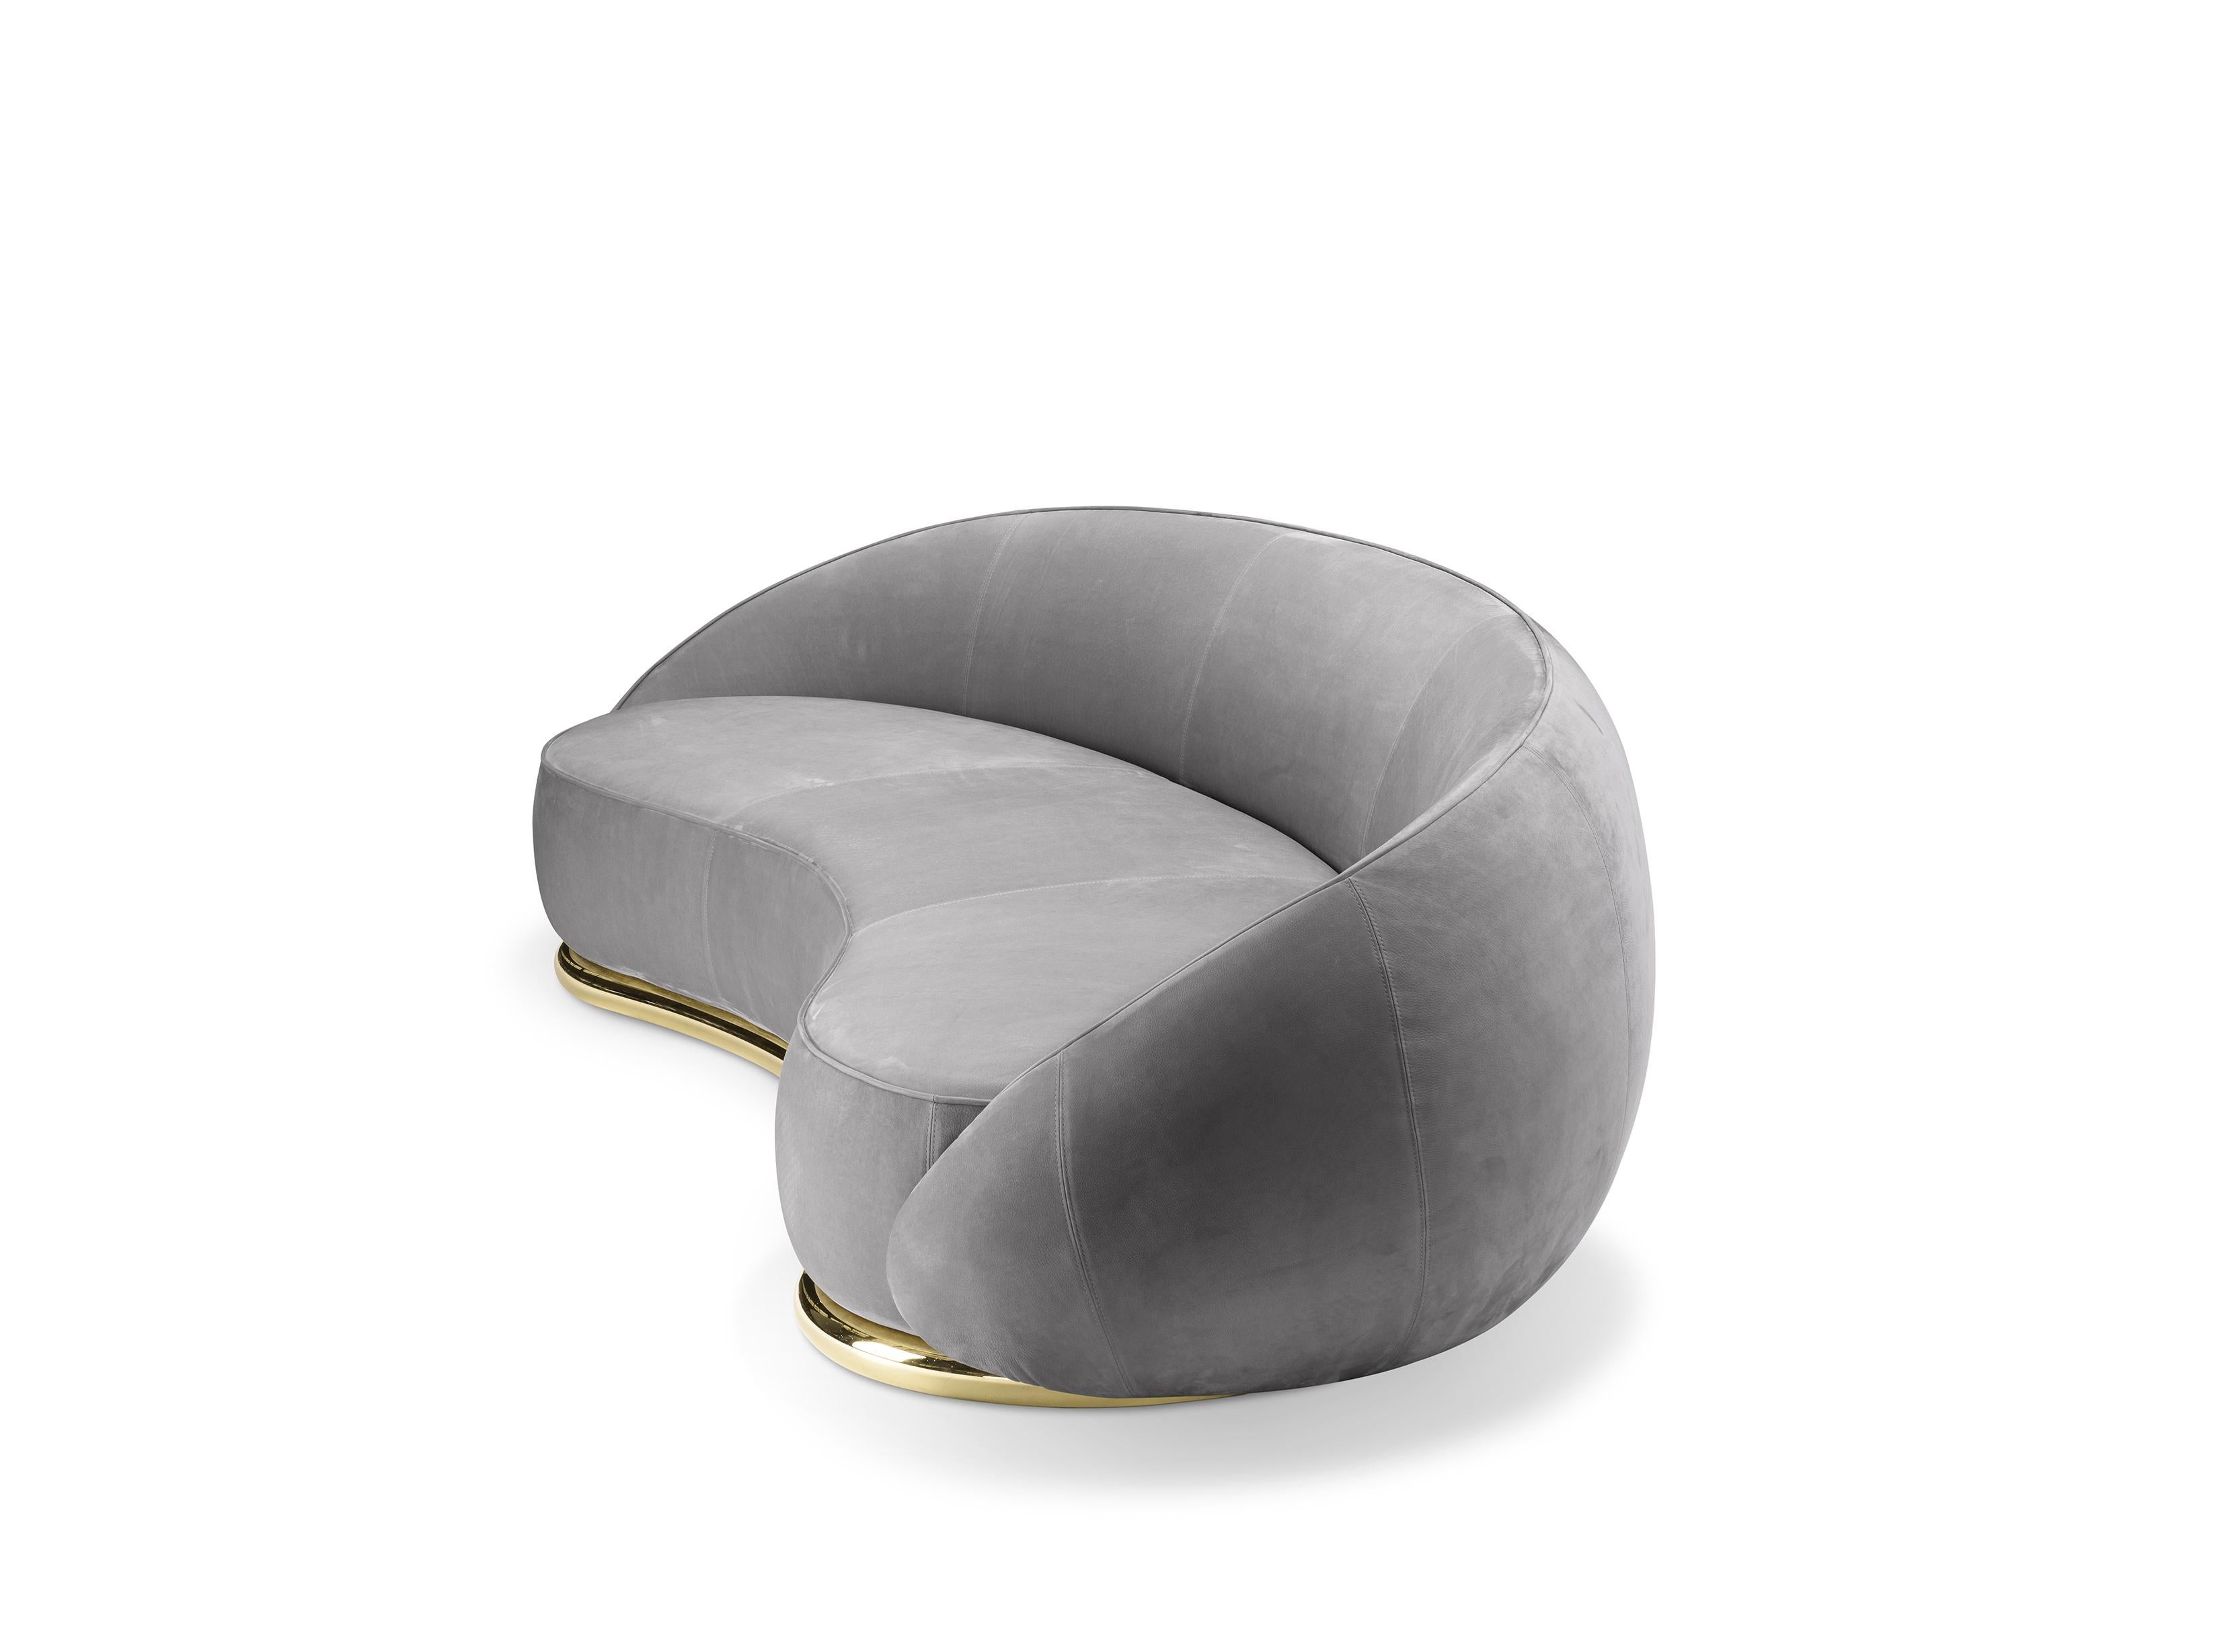 Modern Ghidini 1961 Abbracci 3-Seat Sofa in Grey Leather and Brass Base by L. Bozzoli For Sale